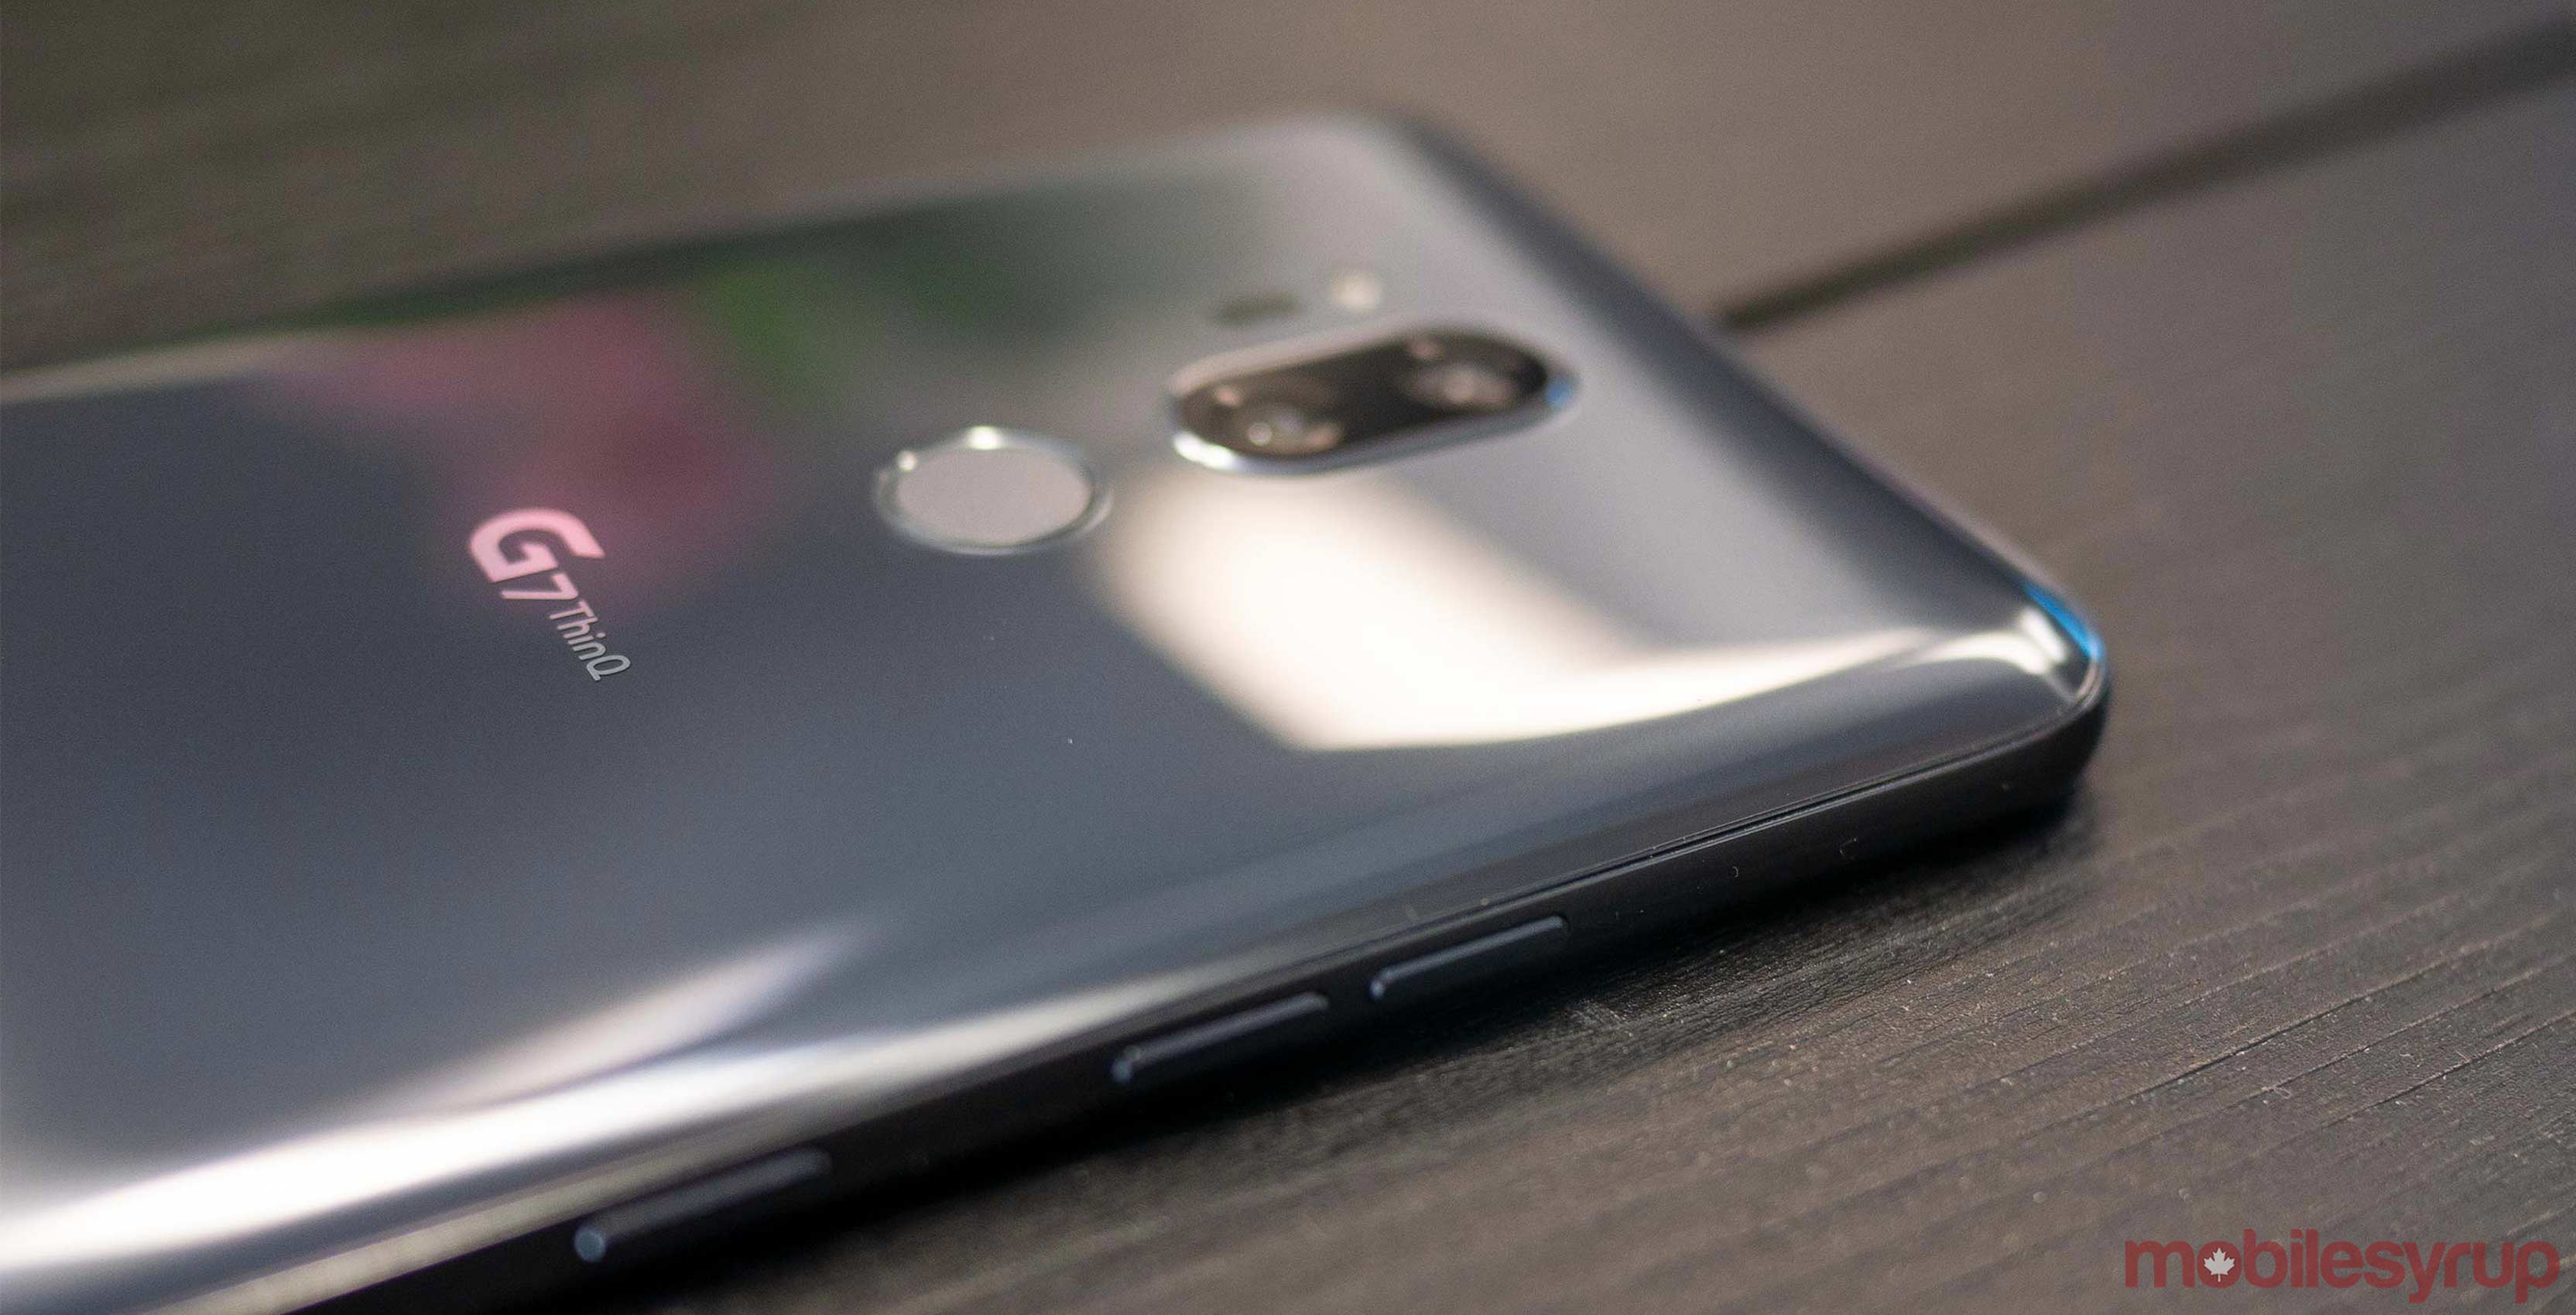 Side view of the LG G7 ThinQ